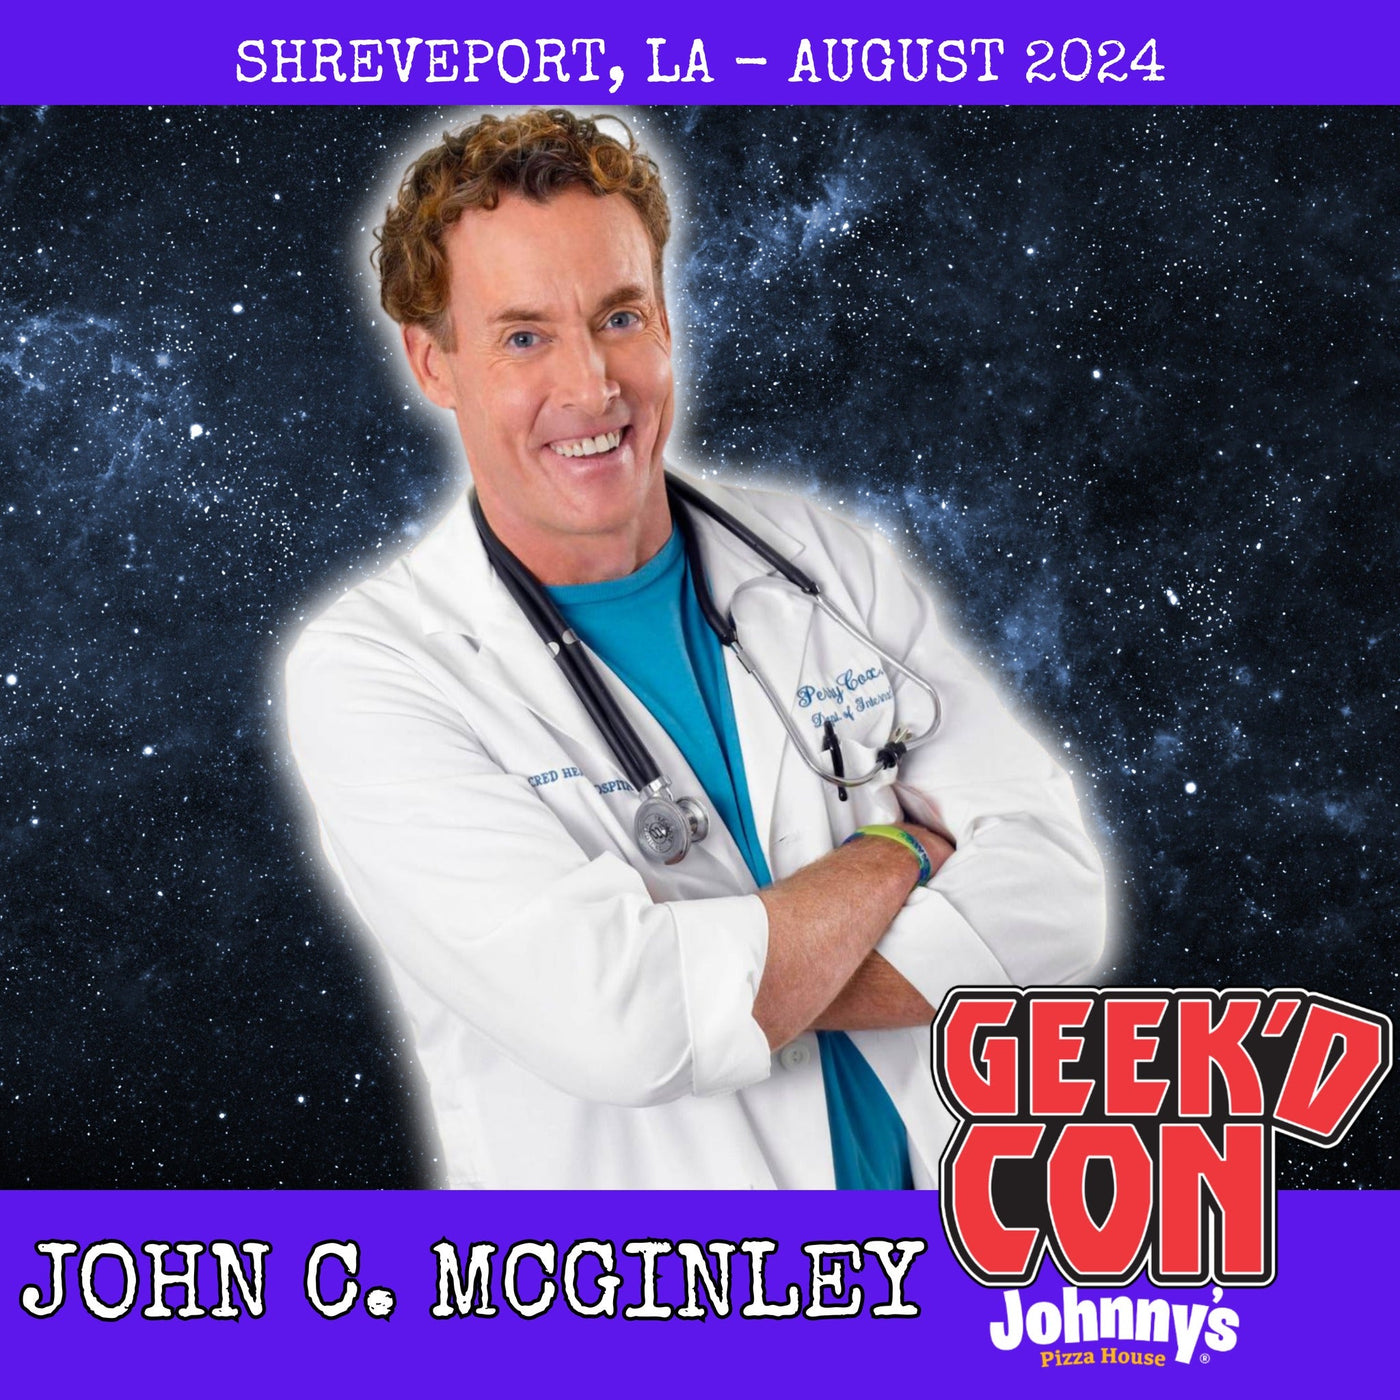 John C. McGinley Official Autograph Mail-In Service - Geek'd Con 2024